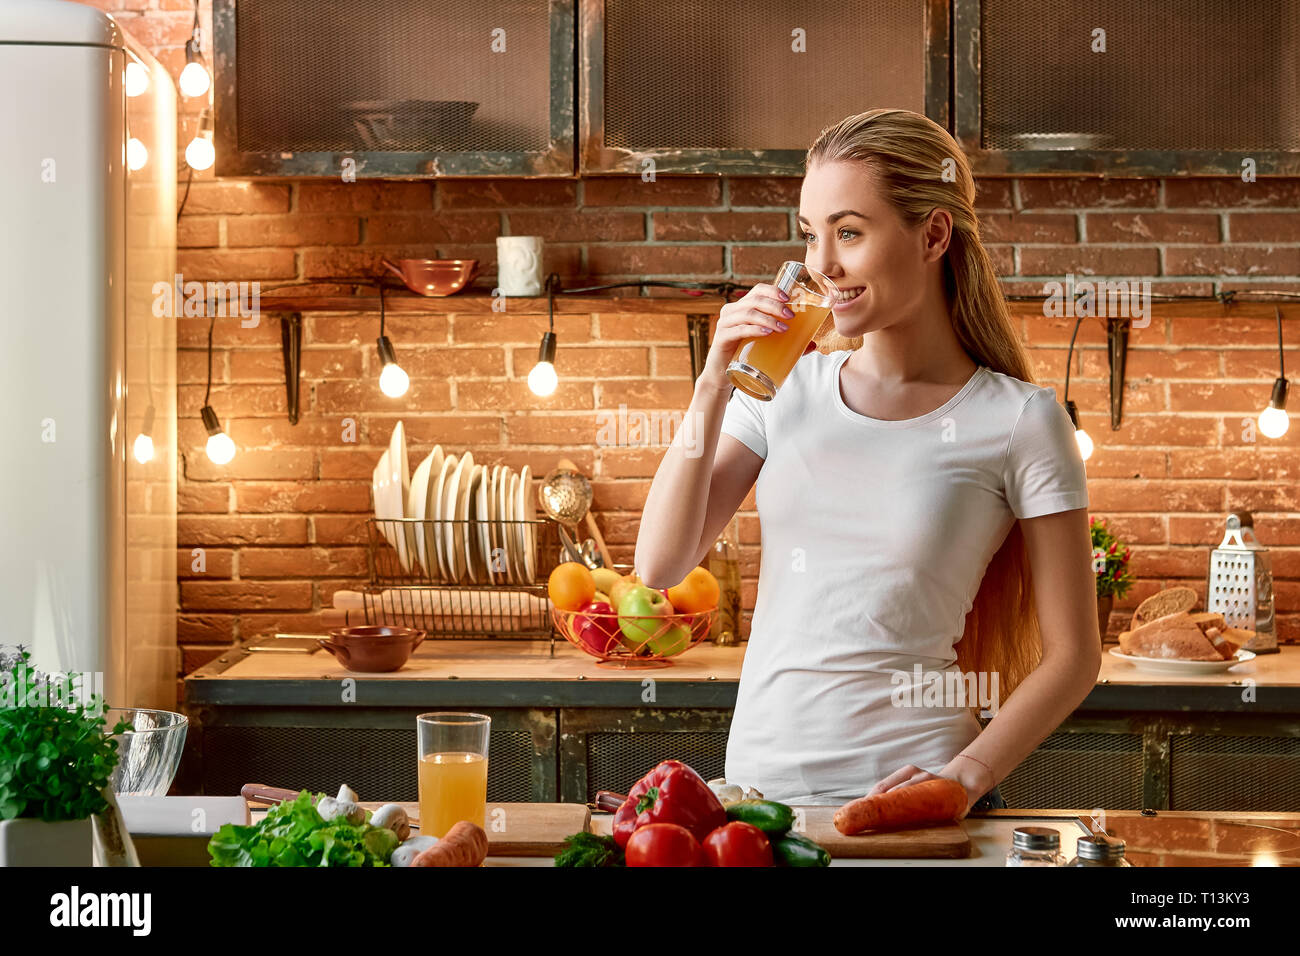 Portrait of blonde girl wearing white T-shirt, holding fresh juice, looking aside and smiling. Attractive young woman is preparing healthy food. Green healthy food concept. Vegetables and a glass of juice are on the tabletop. Front view. Stock Photo